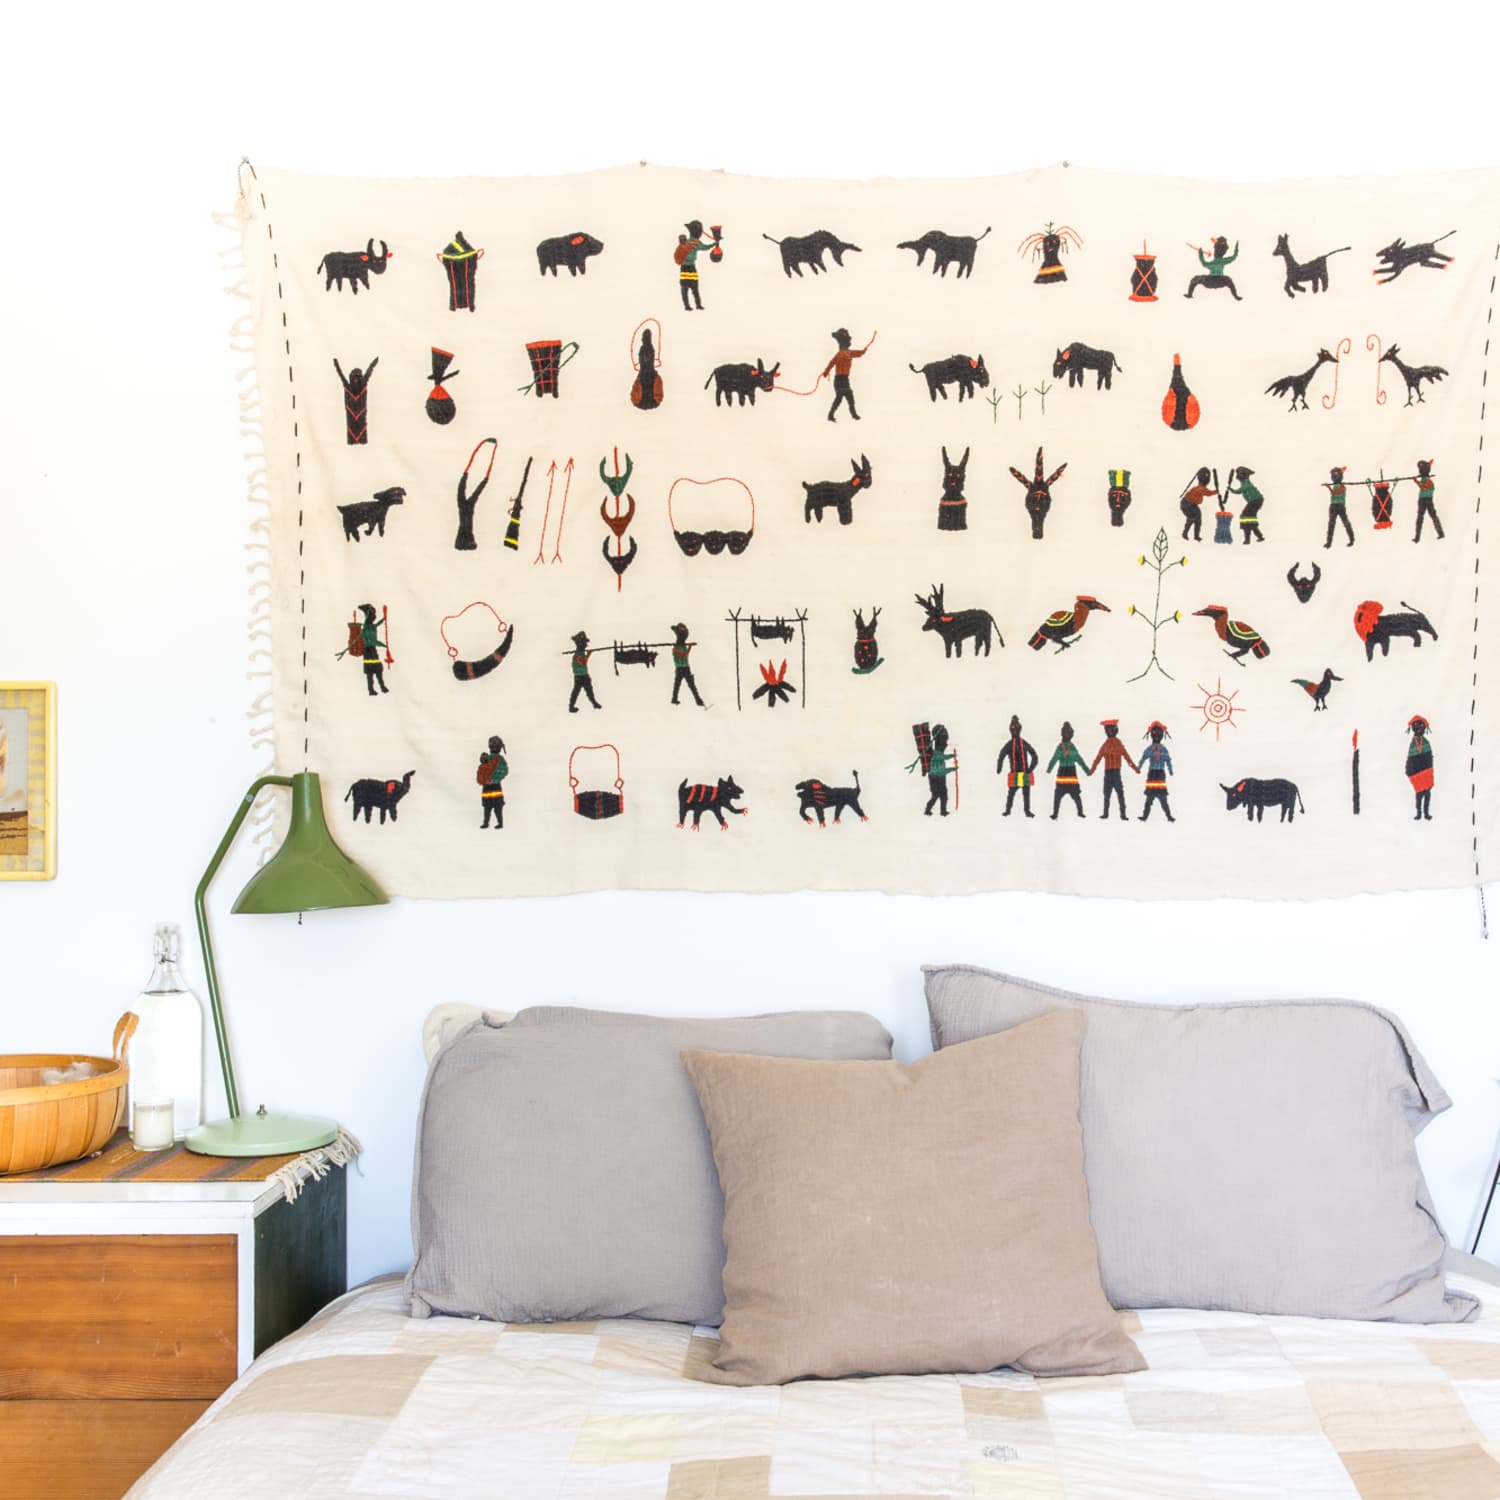 Awesome DIY Tapestry Wall Hangers  Diy tapestry, Diy wall hanging